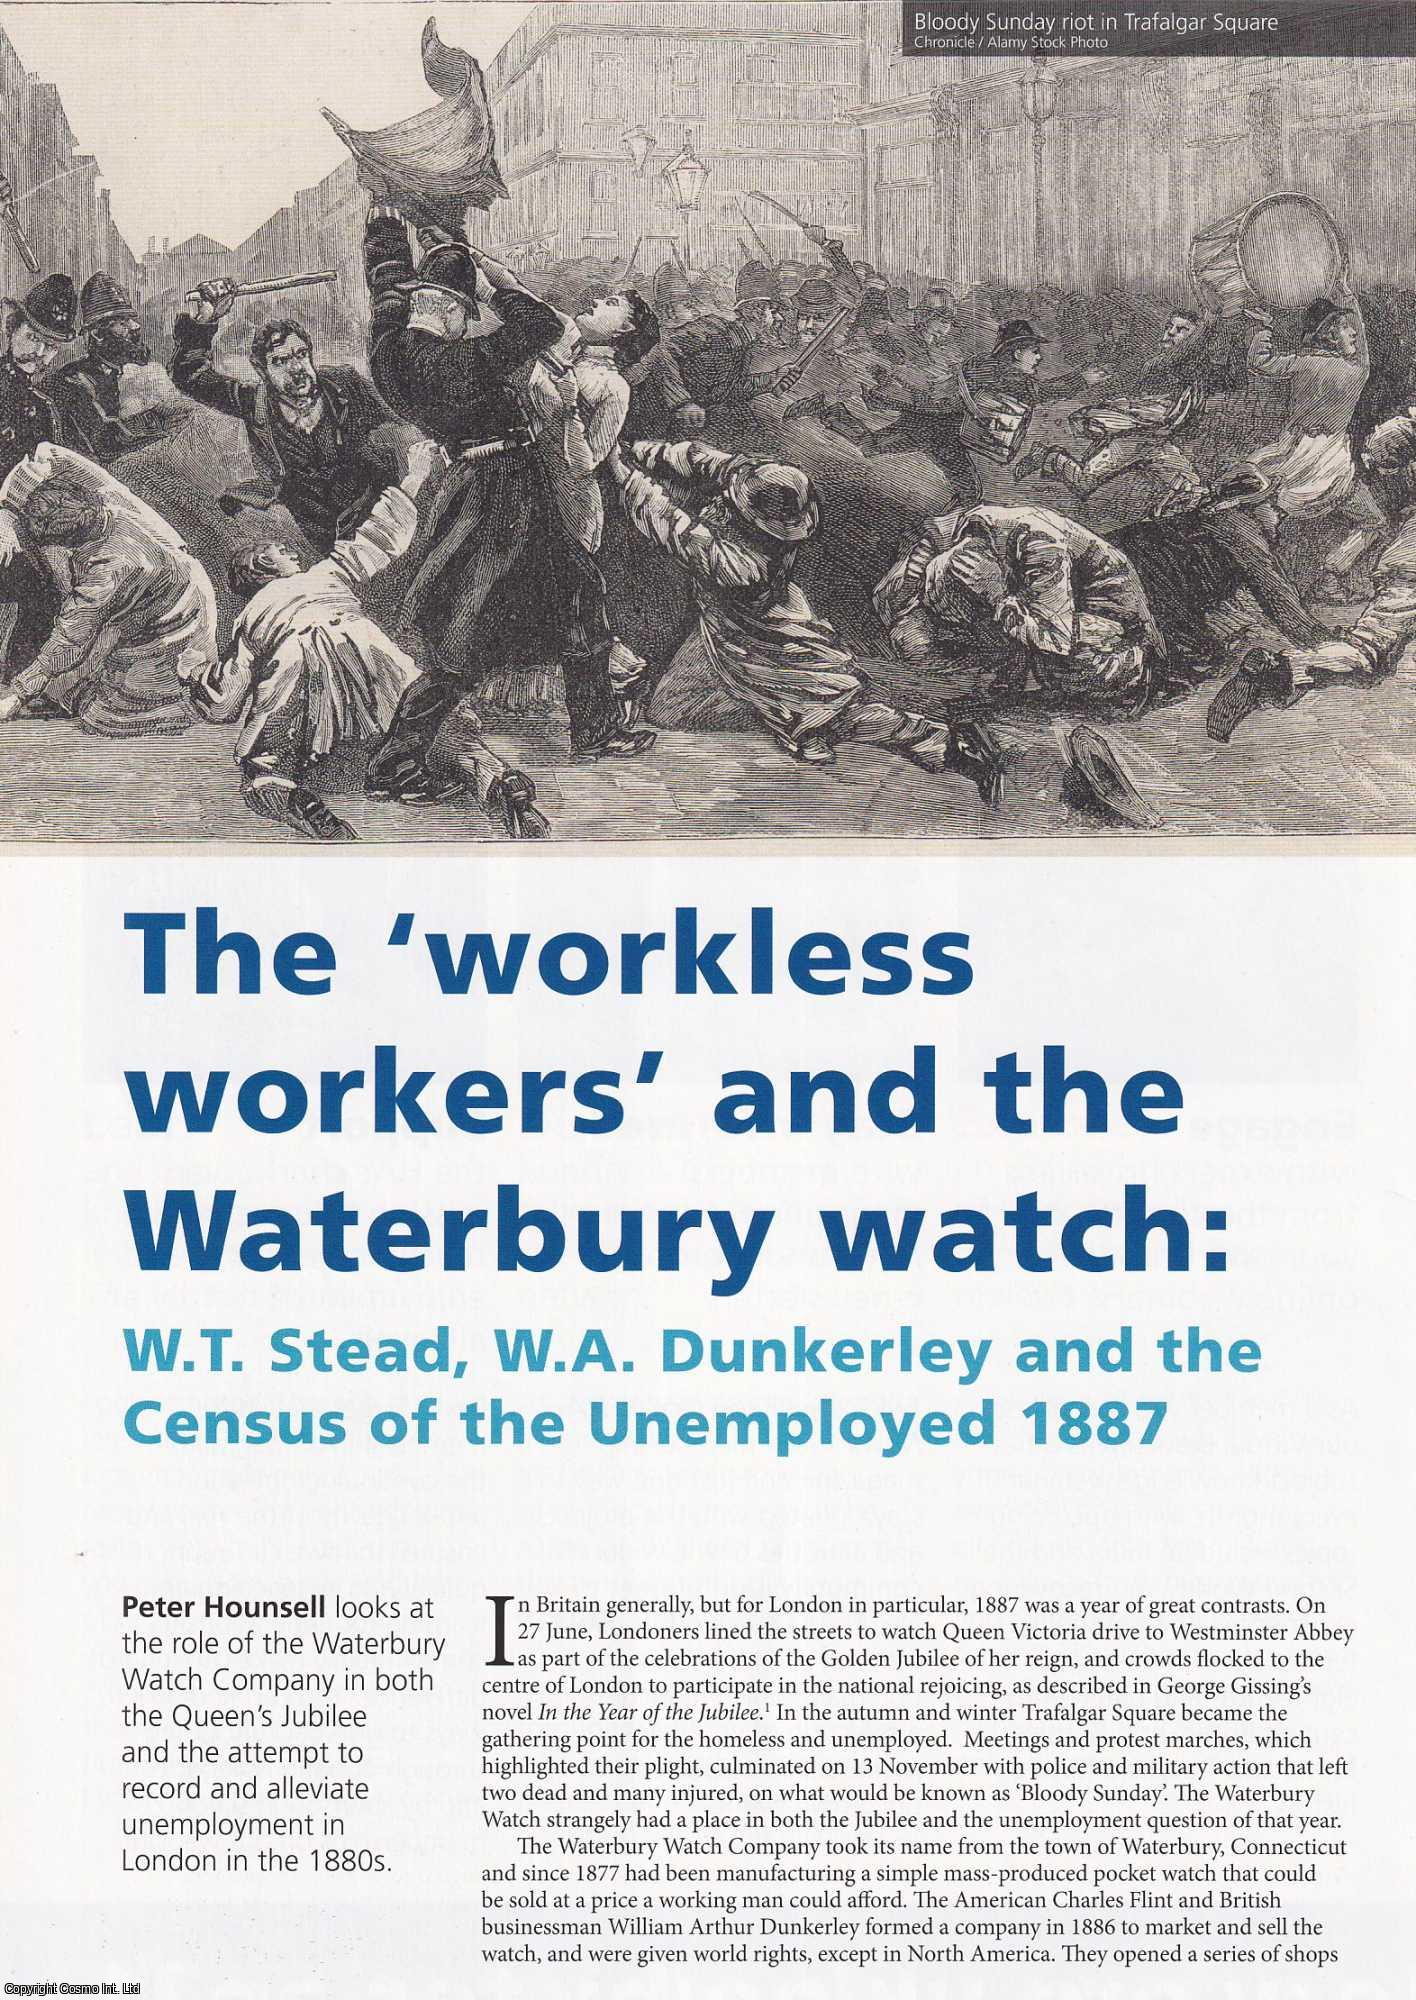 Peter Hounsell - The Role of the Waterbury Watch Company in the Queen's Jubilee and the Census of the Unemployed 1887. An original article from Historian, the magazine of The Historical Association, 2021.